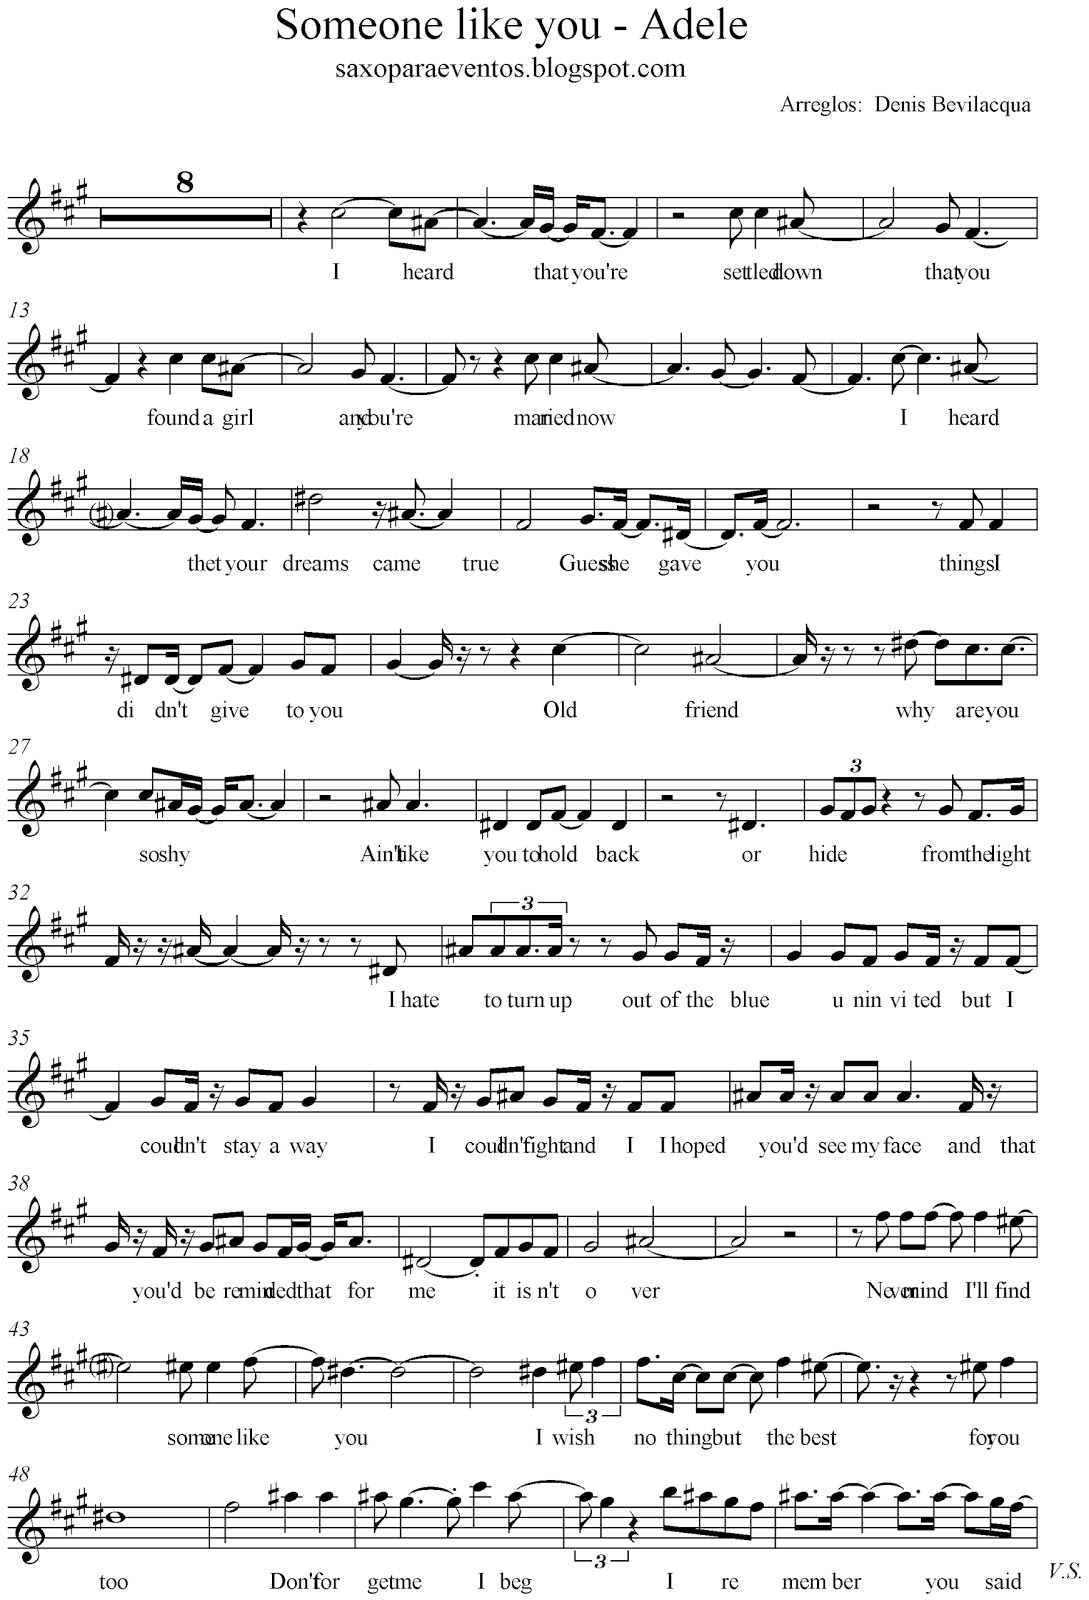 adele someone like you piano sheet music free with notes